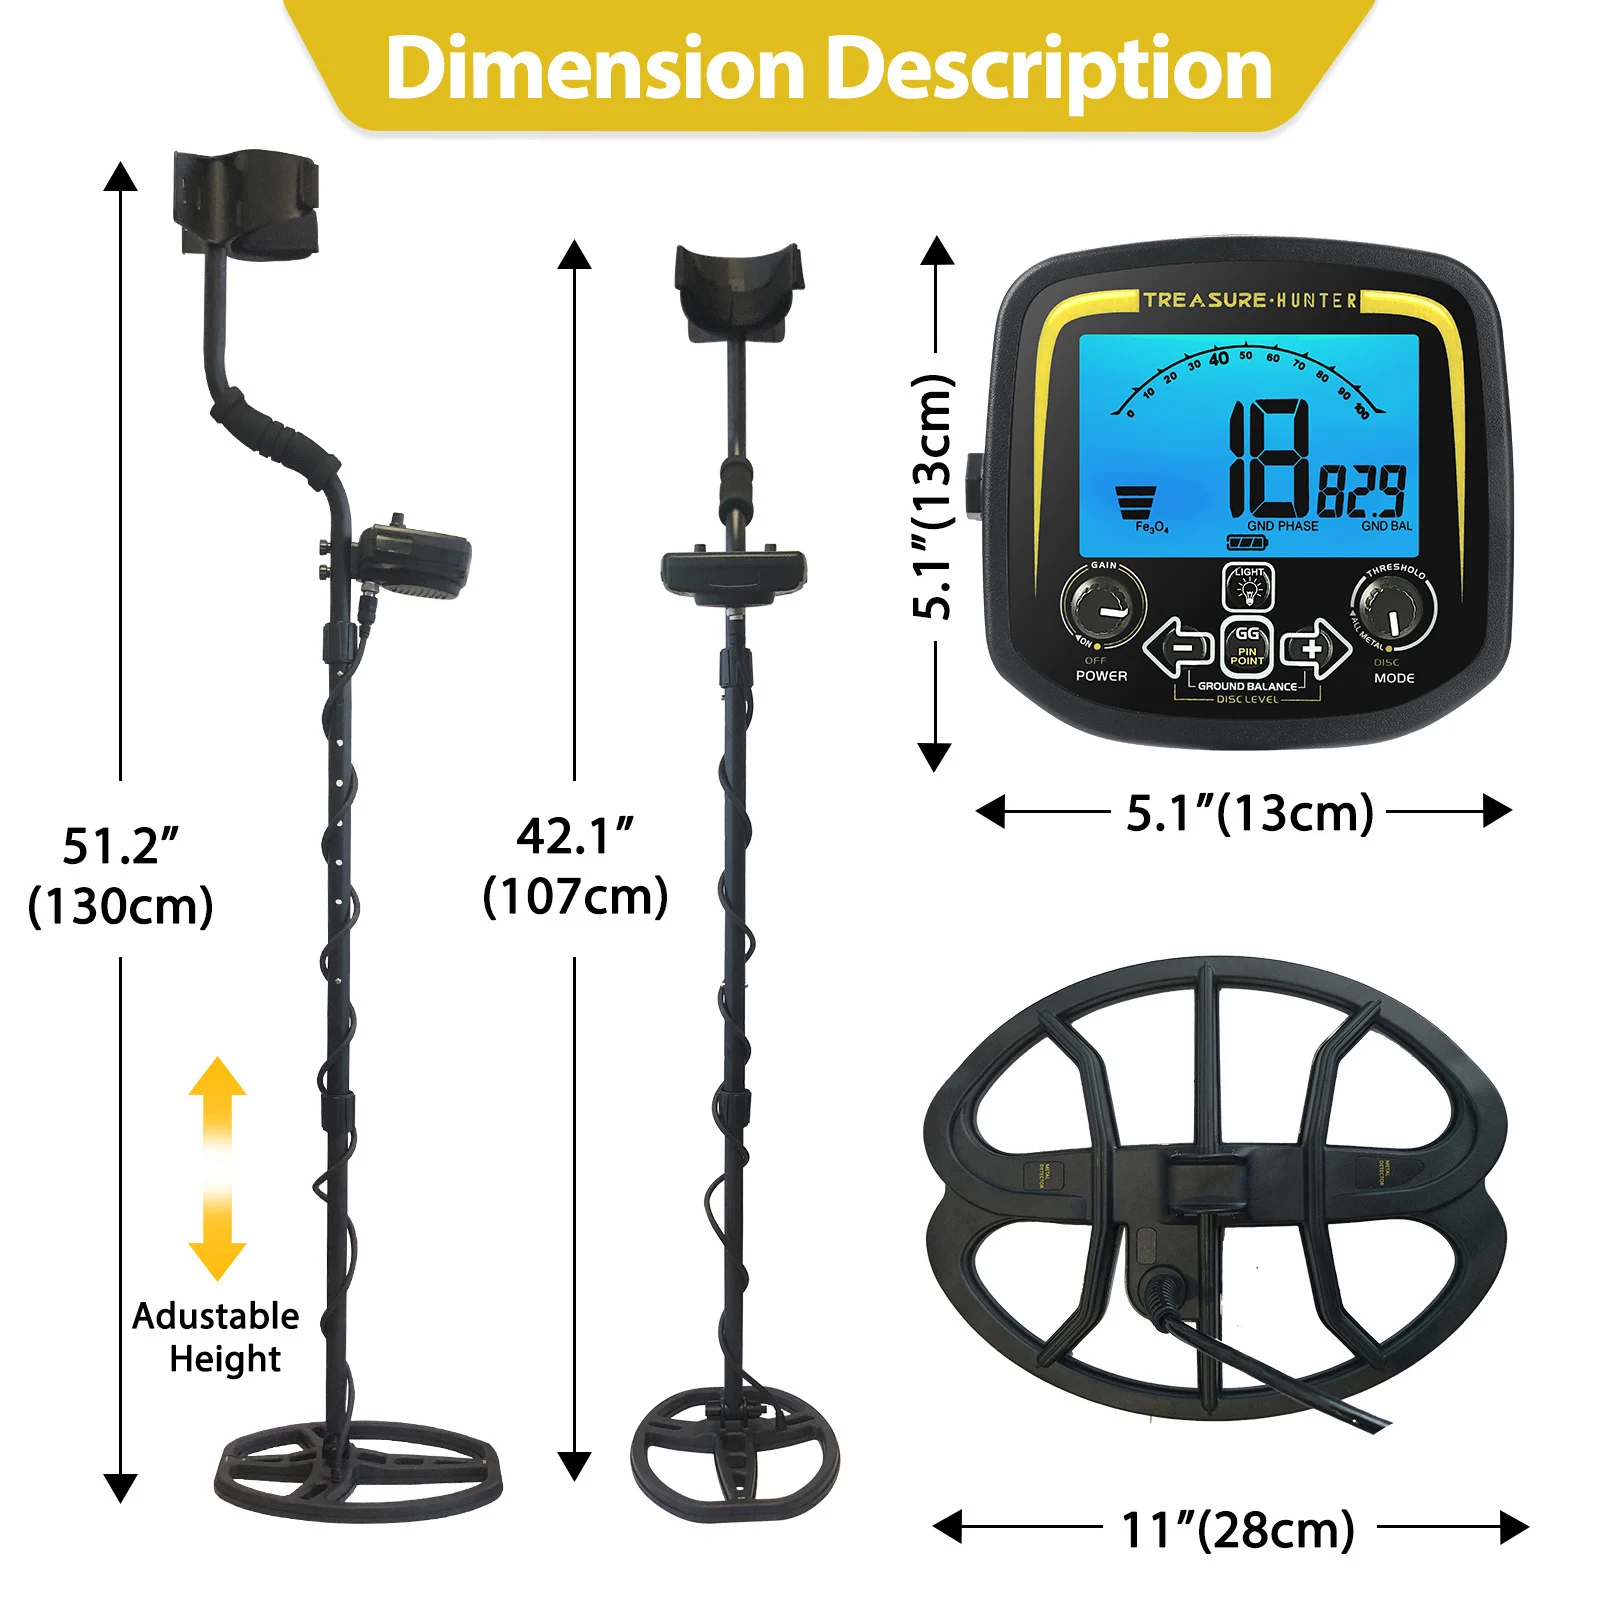 GX850 Underground Metal Detector Pinpoint Positioning IP68 Waterproof Coil Portable Gold Finder Detector for Treasure Search